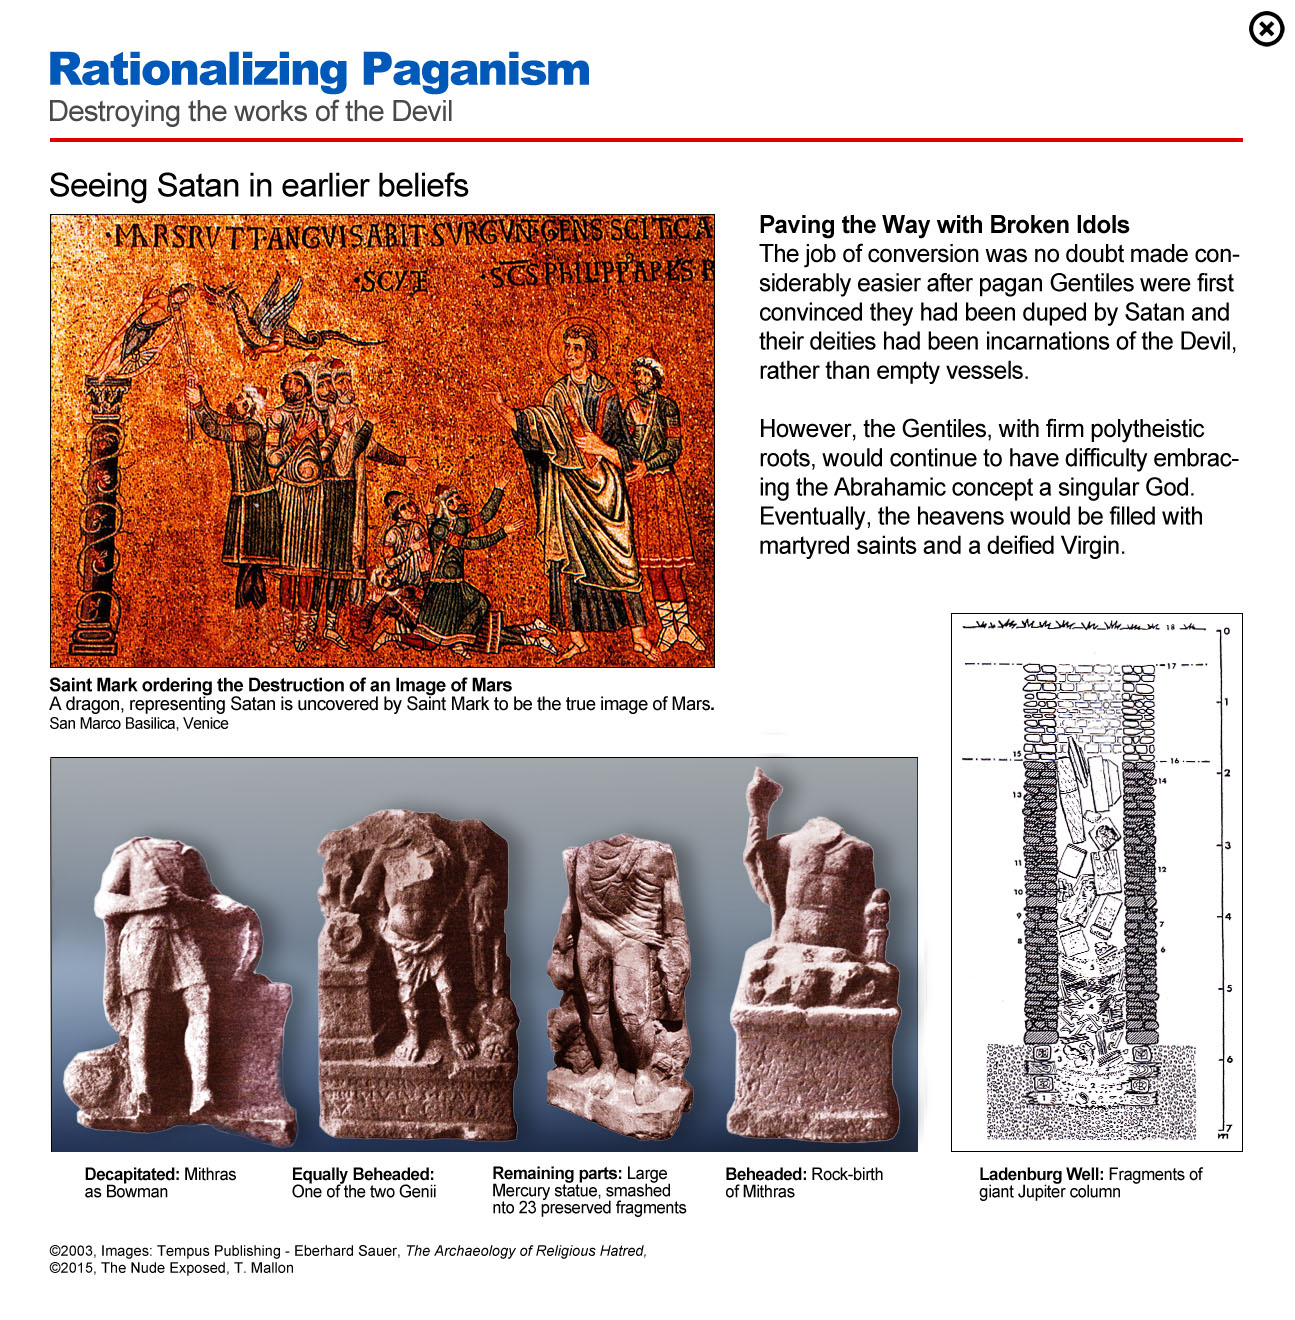 Rationalizing Paganism: Destroying the works of the Devil